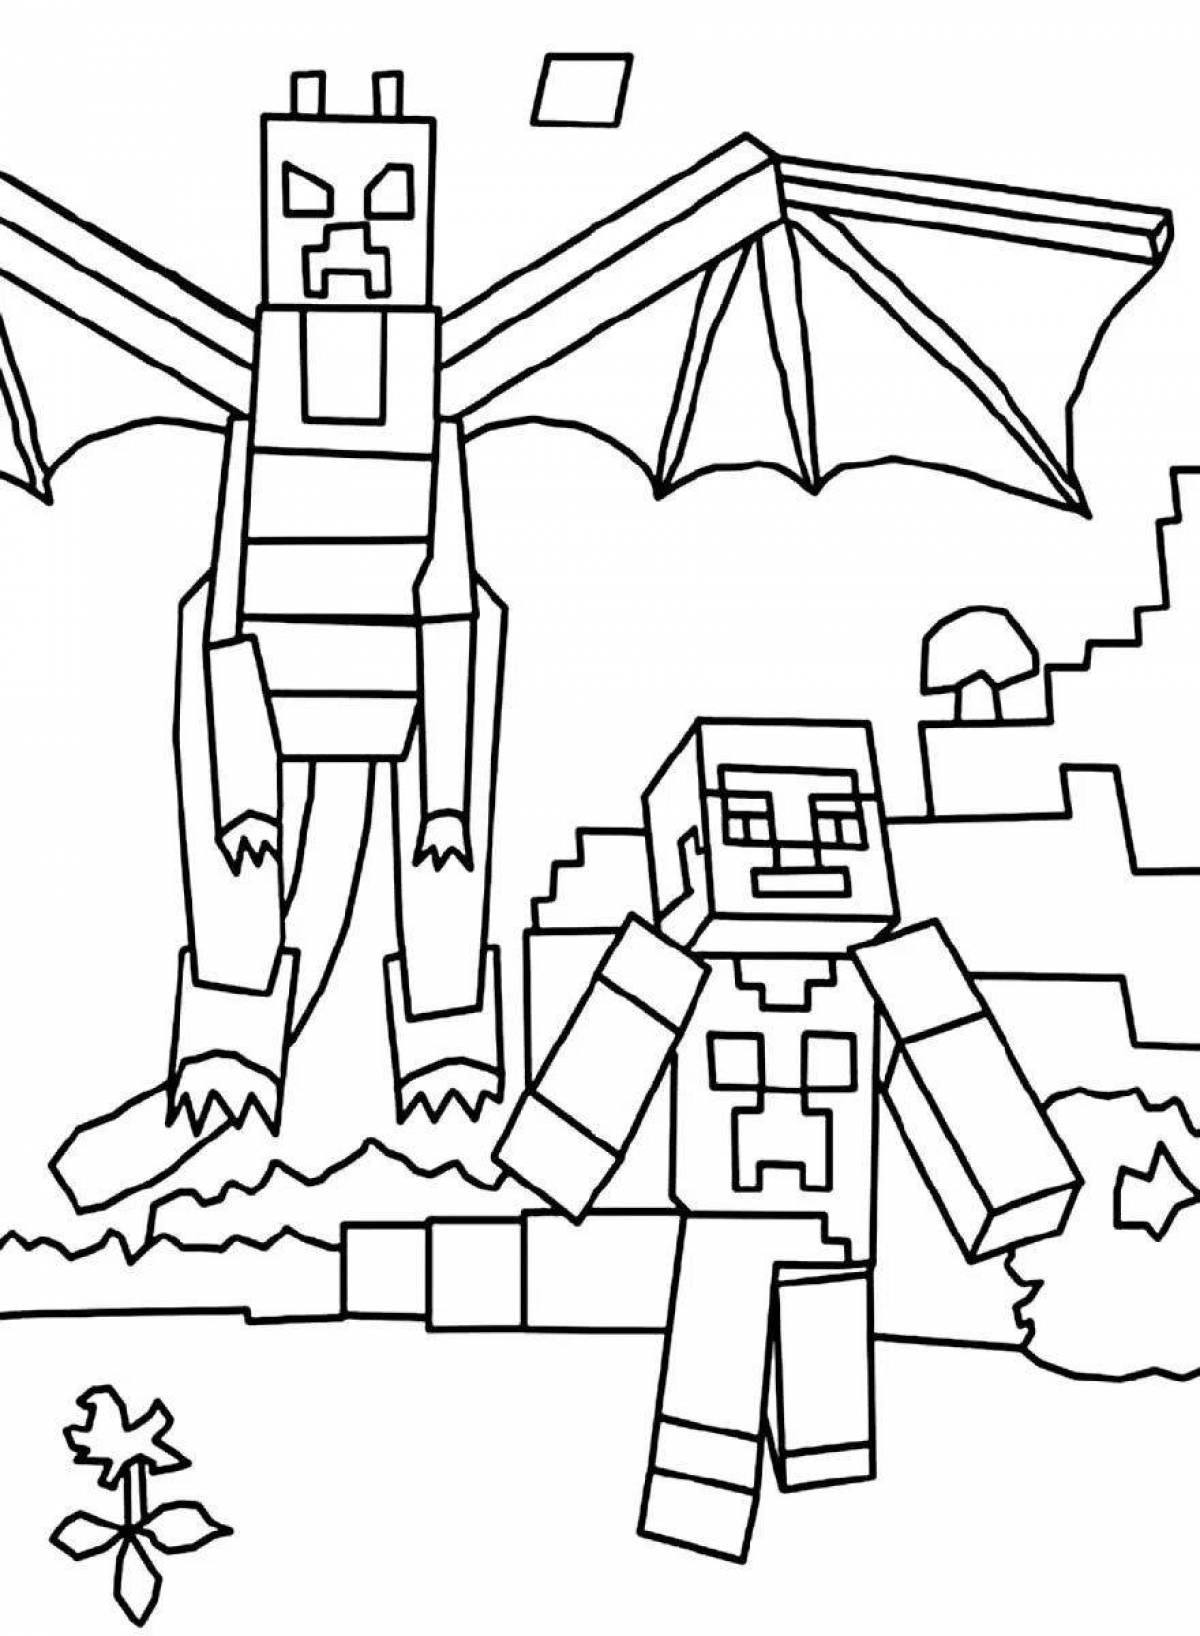 Amazing ender world coloring page